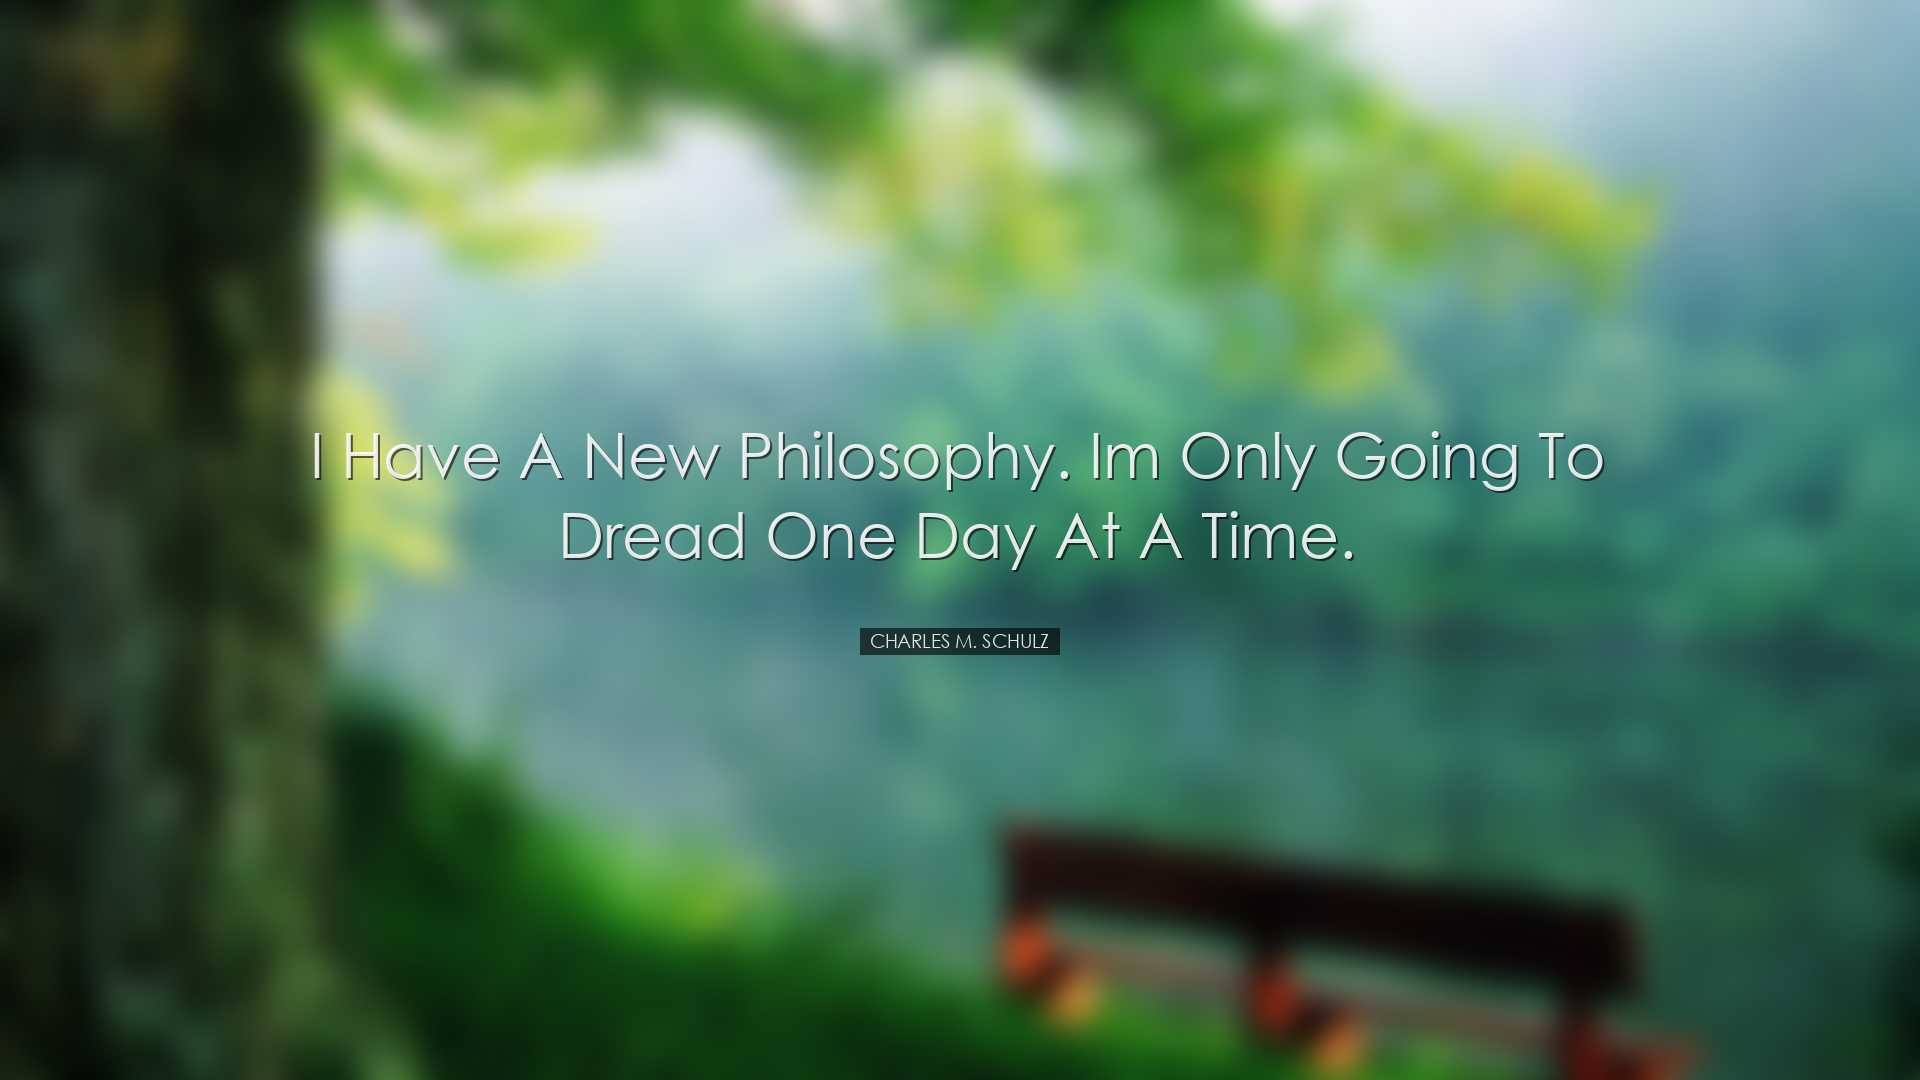 I have a new philosophy. Im only going to dread one day at a time.